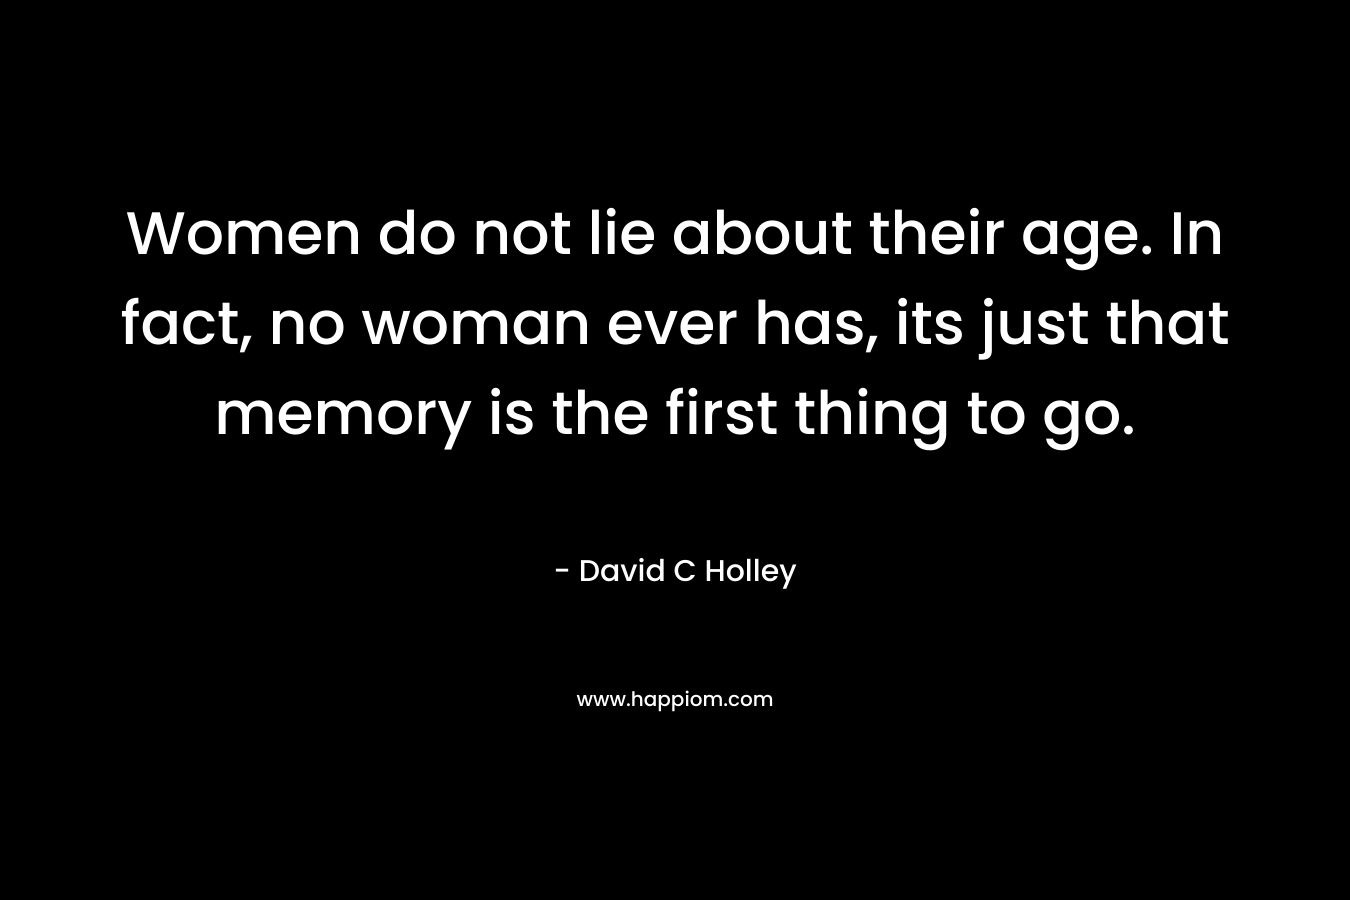 Women do not lie about their age. In fact, no woman ever has, its just that memory is the first thing to go.